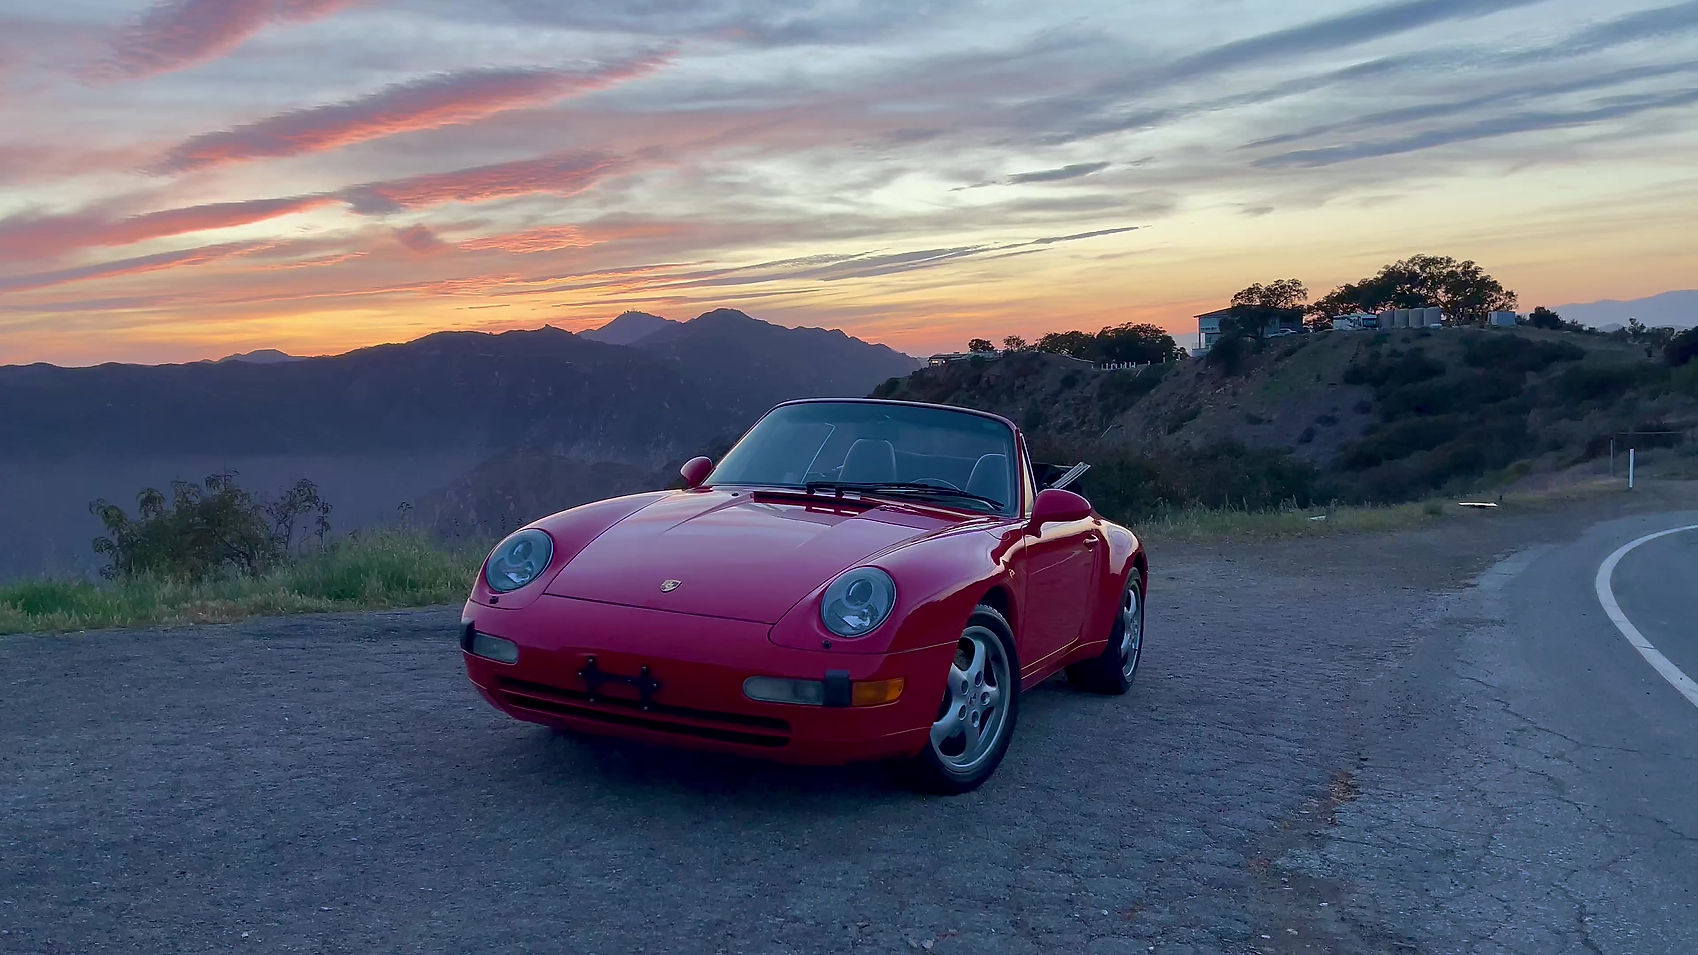 "Grandpa's Convertible" -  Charlie will learn driving this beautiful 1995 Porsche 911